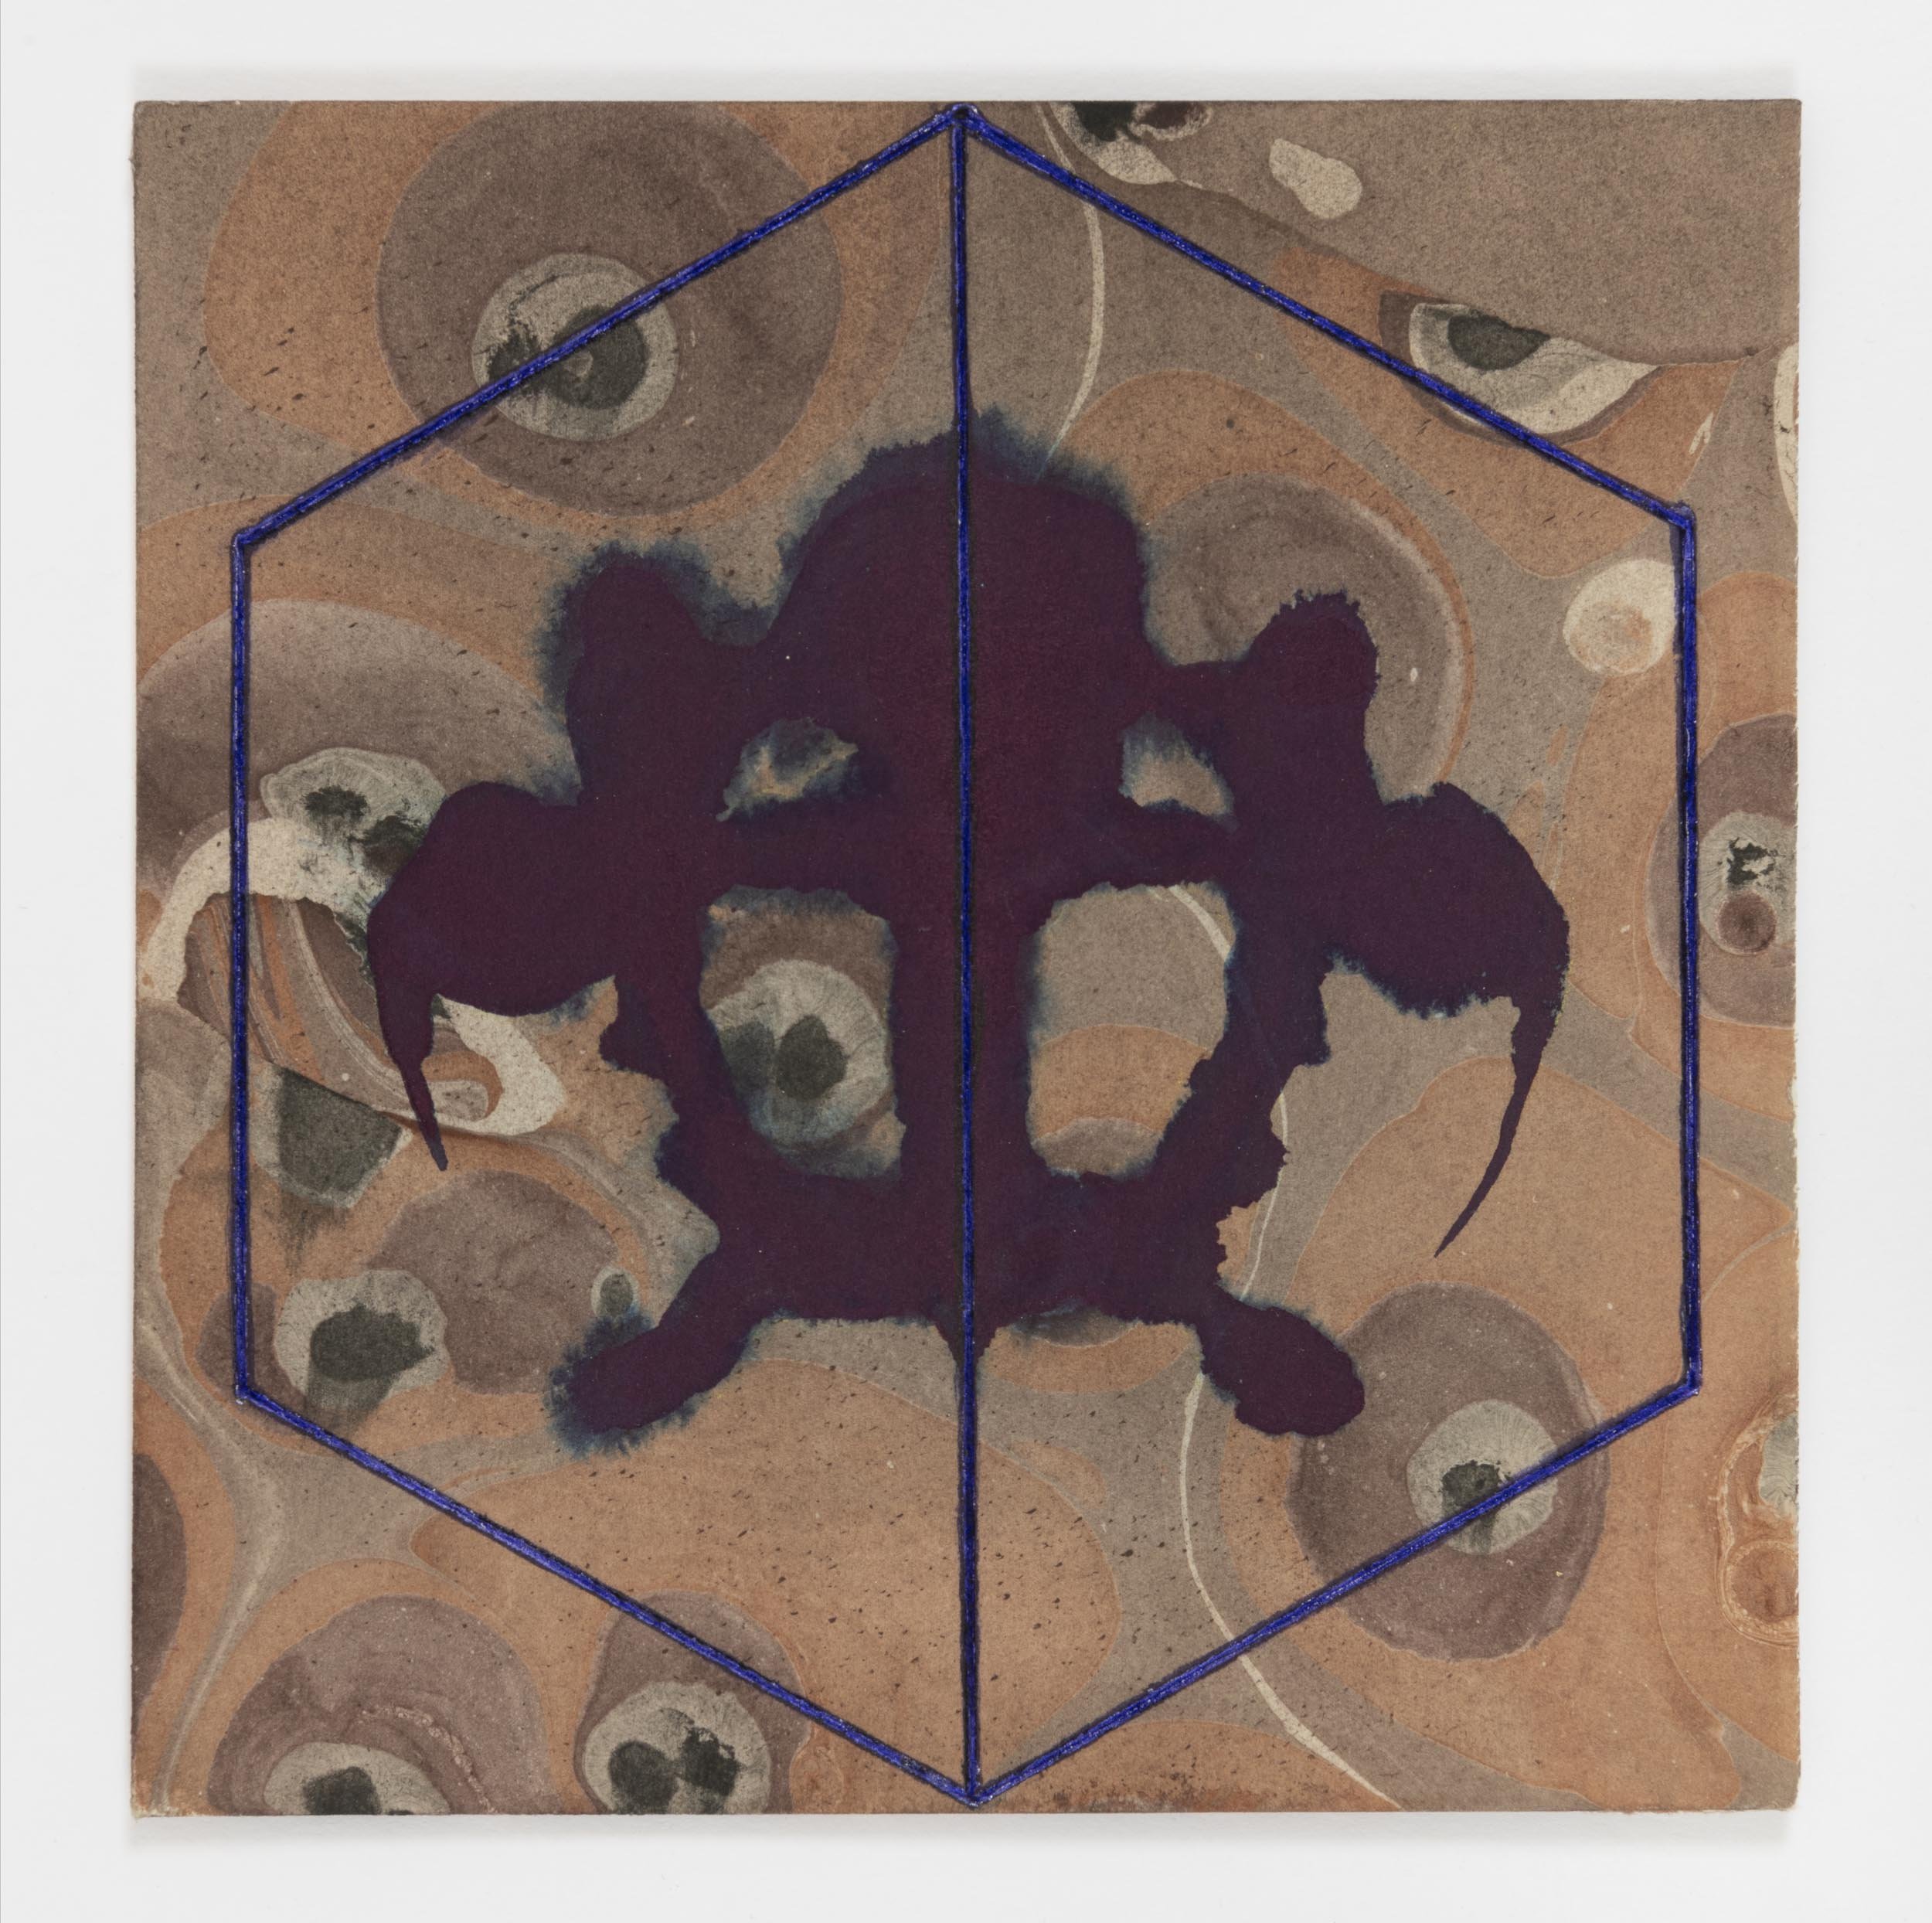  Rorschach 1, 2021 gouache with toned aluminum leaf on paper 7 x 6¾ in. &nbsp; 17.78 x 17.14 cm. 